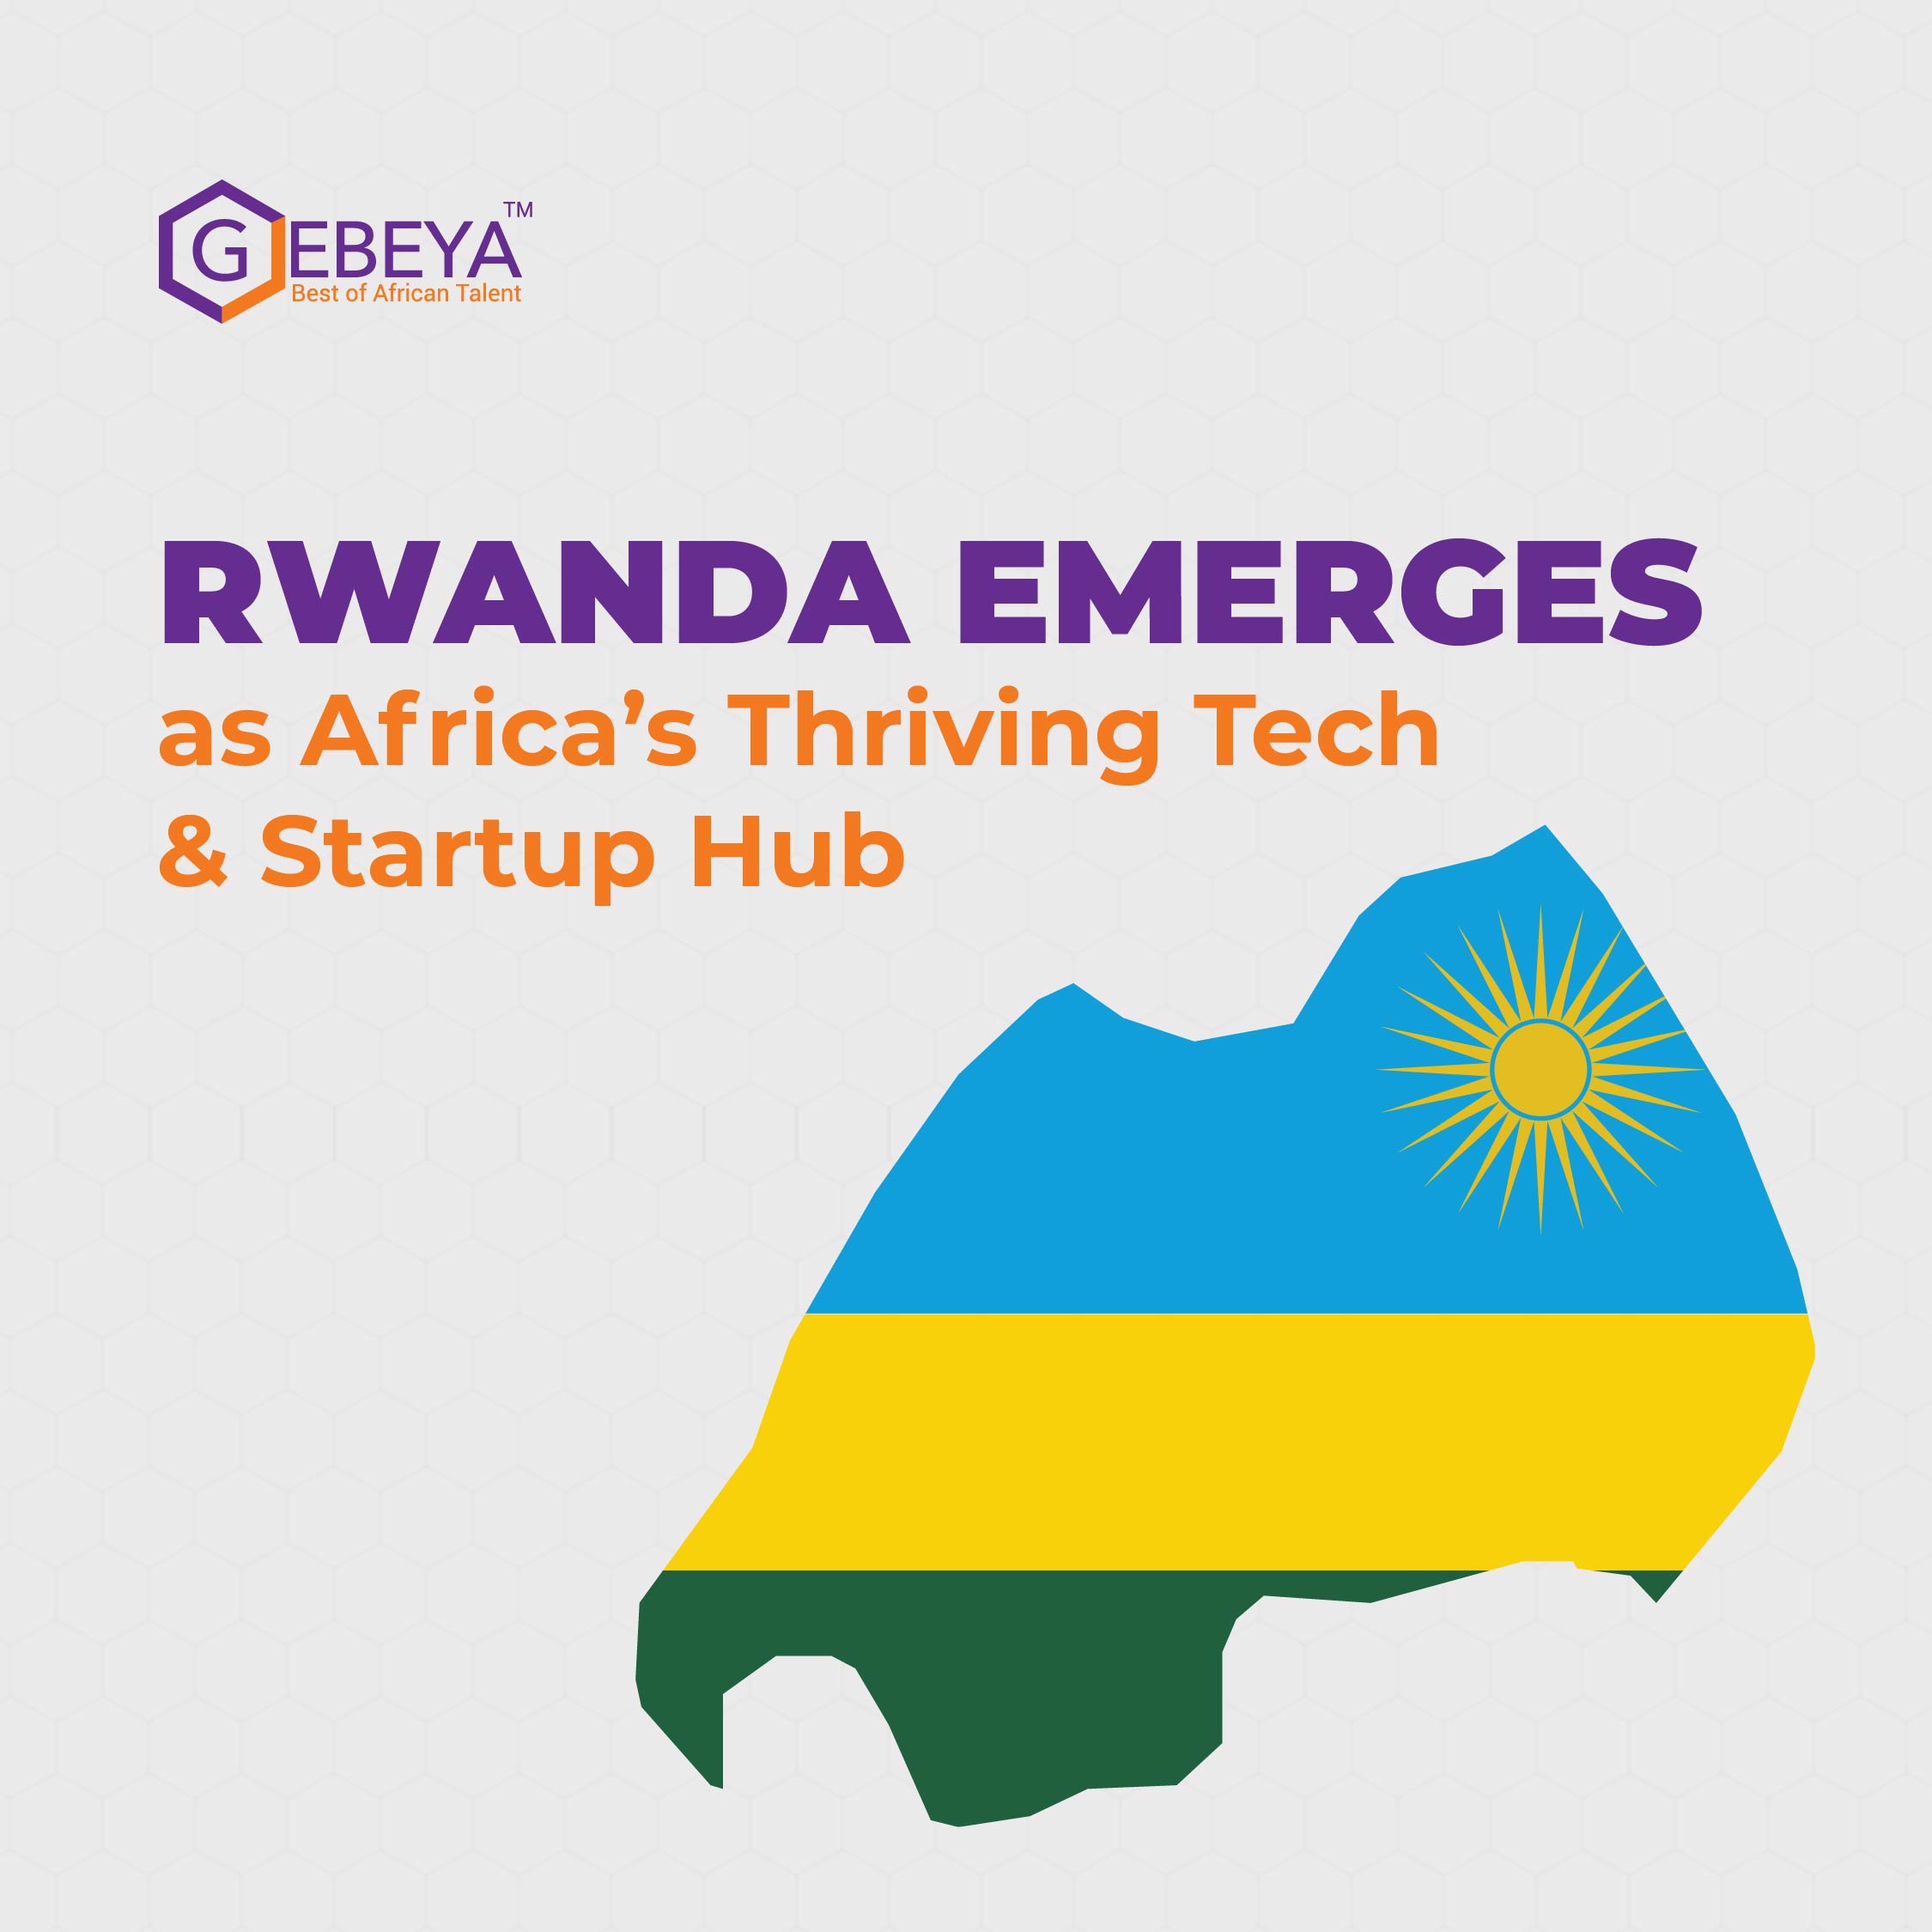 Africa’s Thriving Tech and Startup Hub